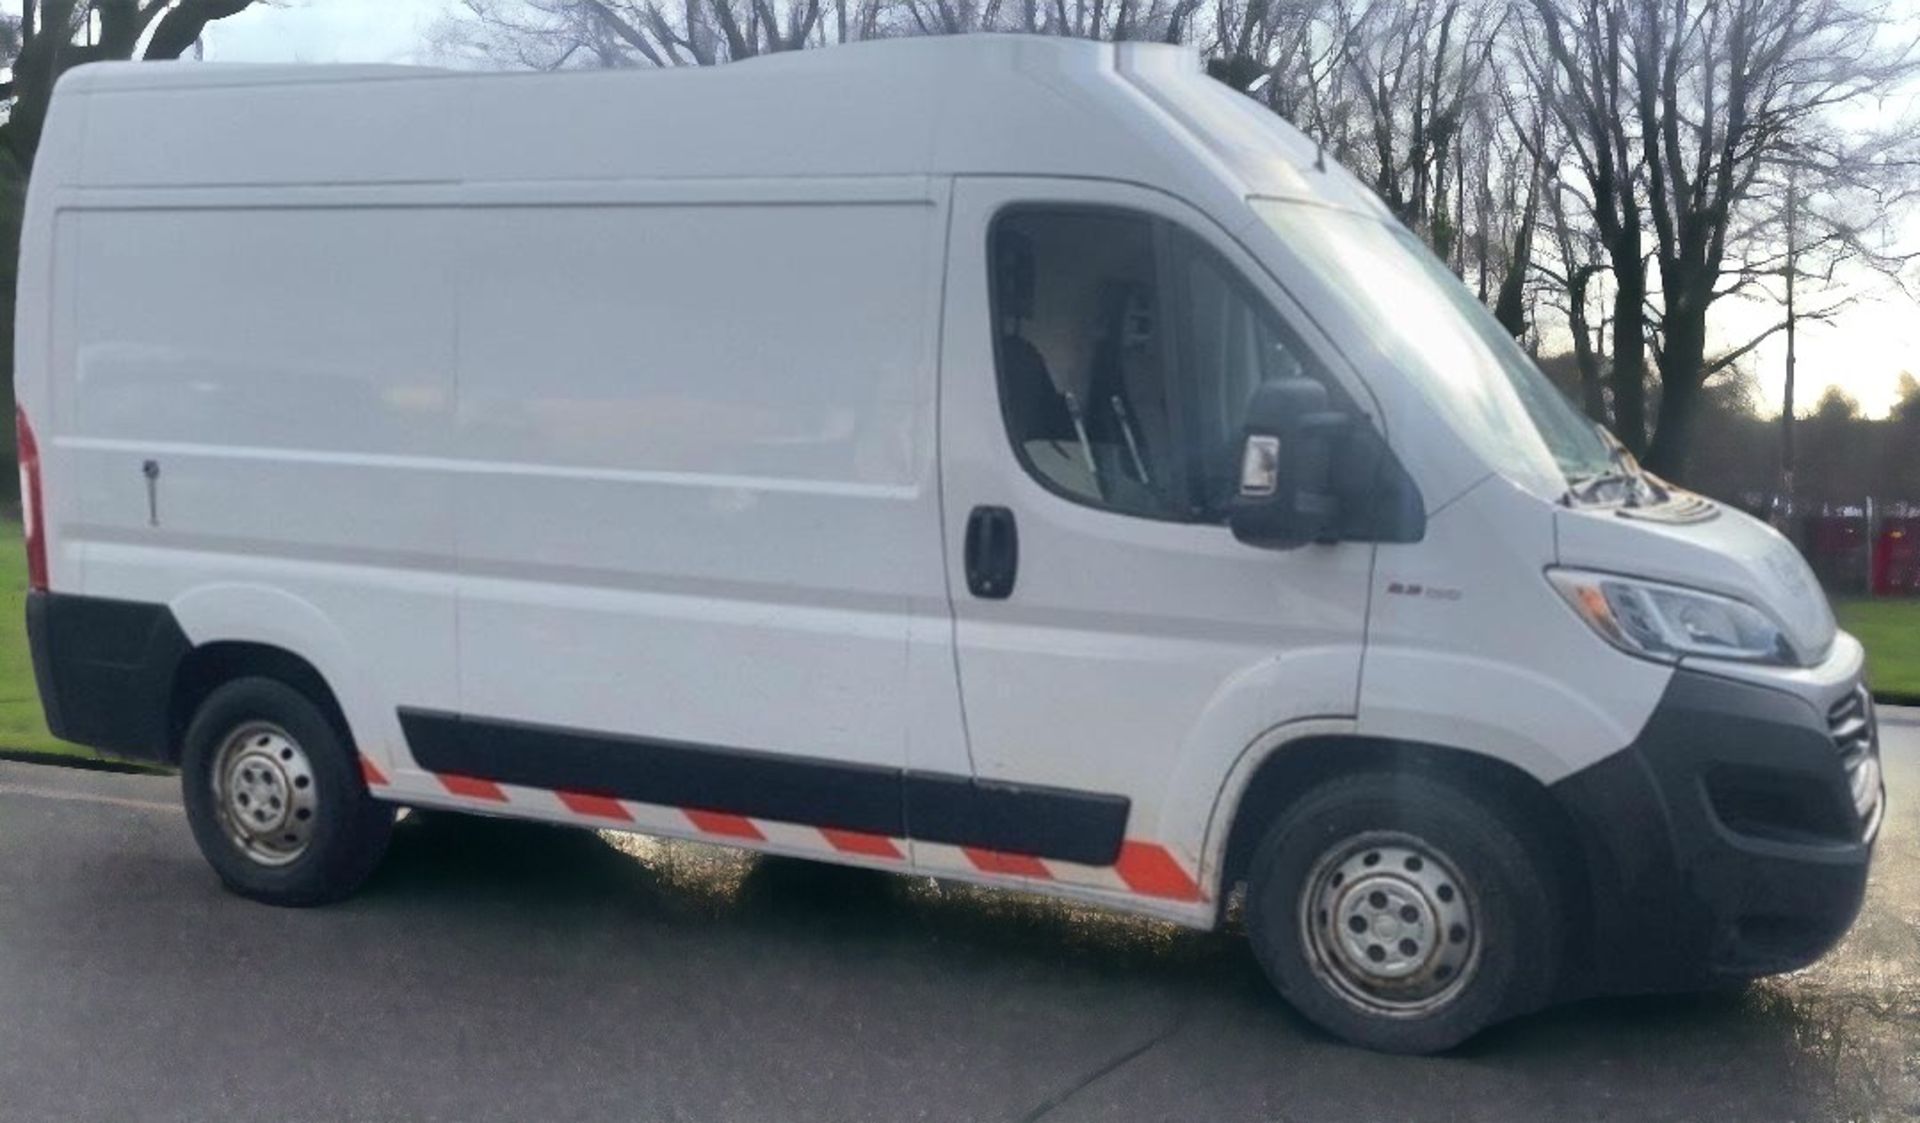 2019 FIAT DUCATO L2 MWB PANEL VAN - VERSATILE AND RELIABLE FOR YOUR BUSINESS NEEDS - Image 6 of 18